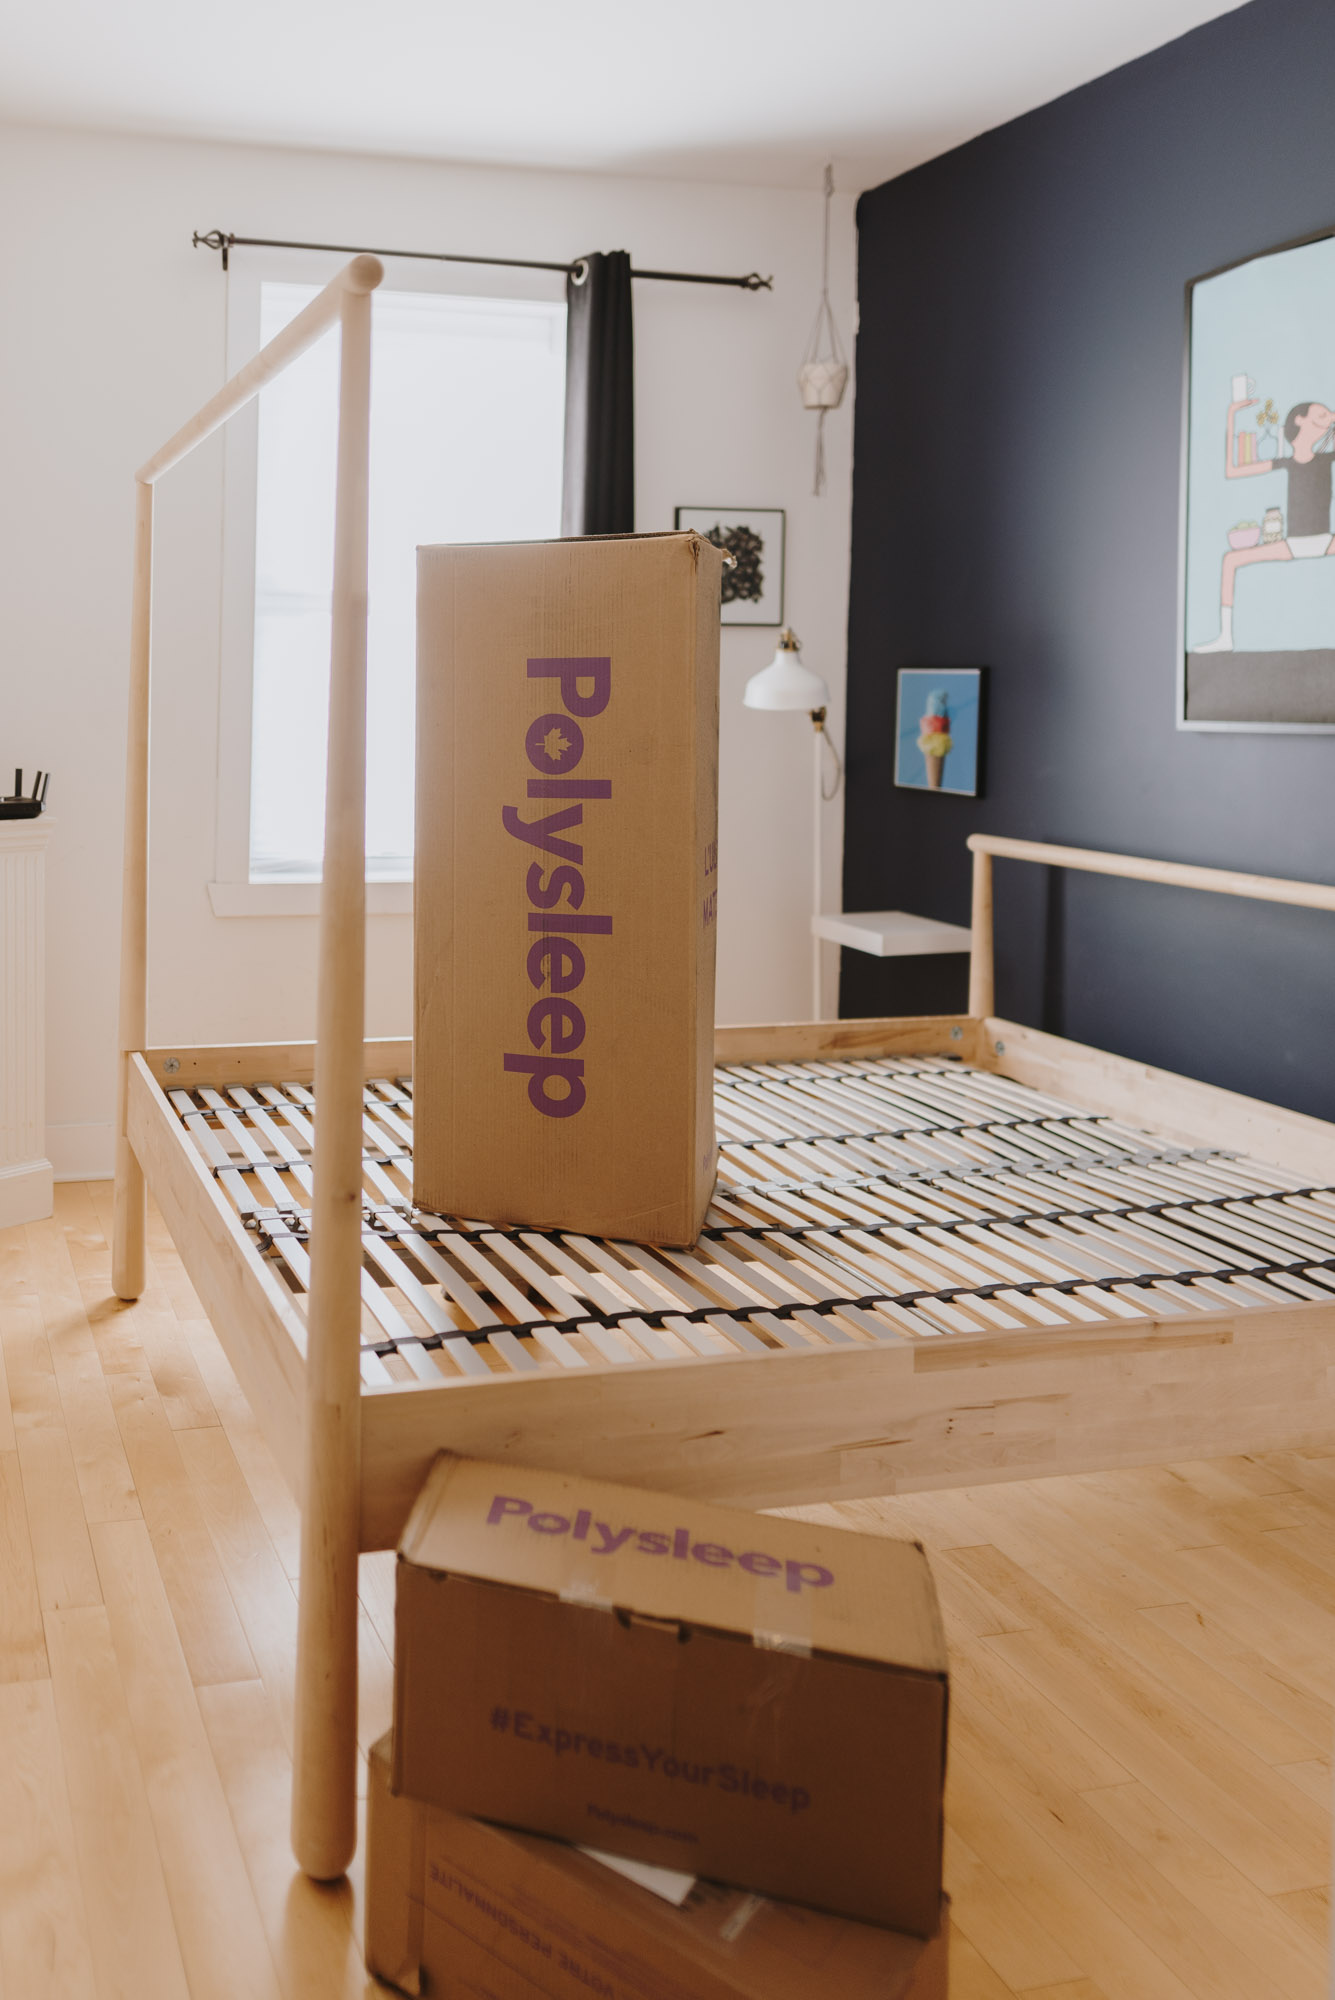 Polysleep Mattress — Jeff On The Road — All photos are under Copyright  © 2019 Jeff Frenette Photography / dezjeff. To use the photos, please contact me at dezjeff@me.com.